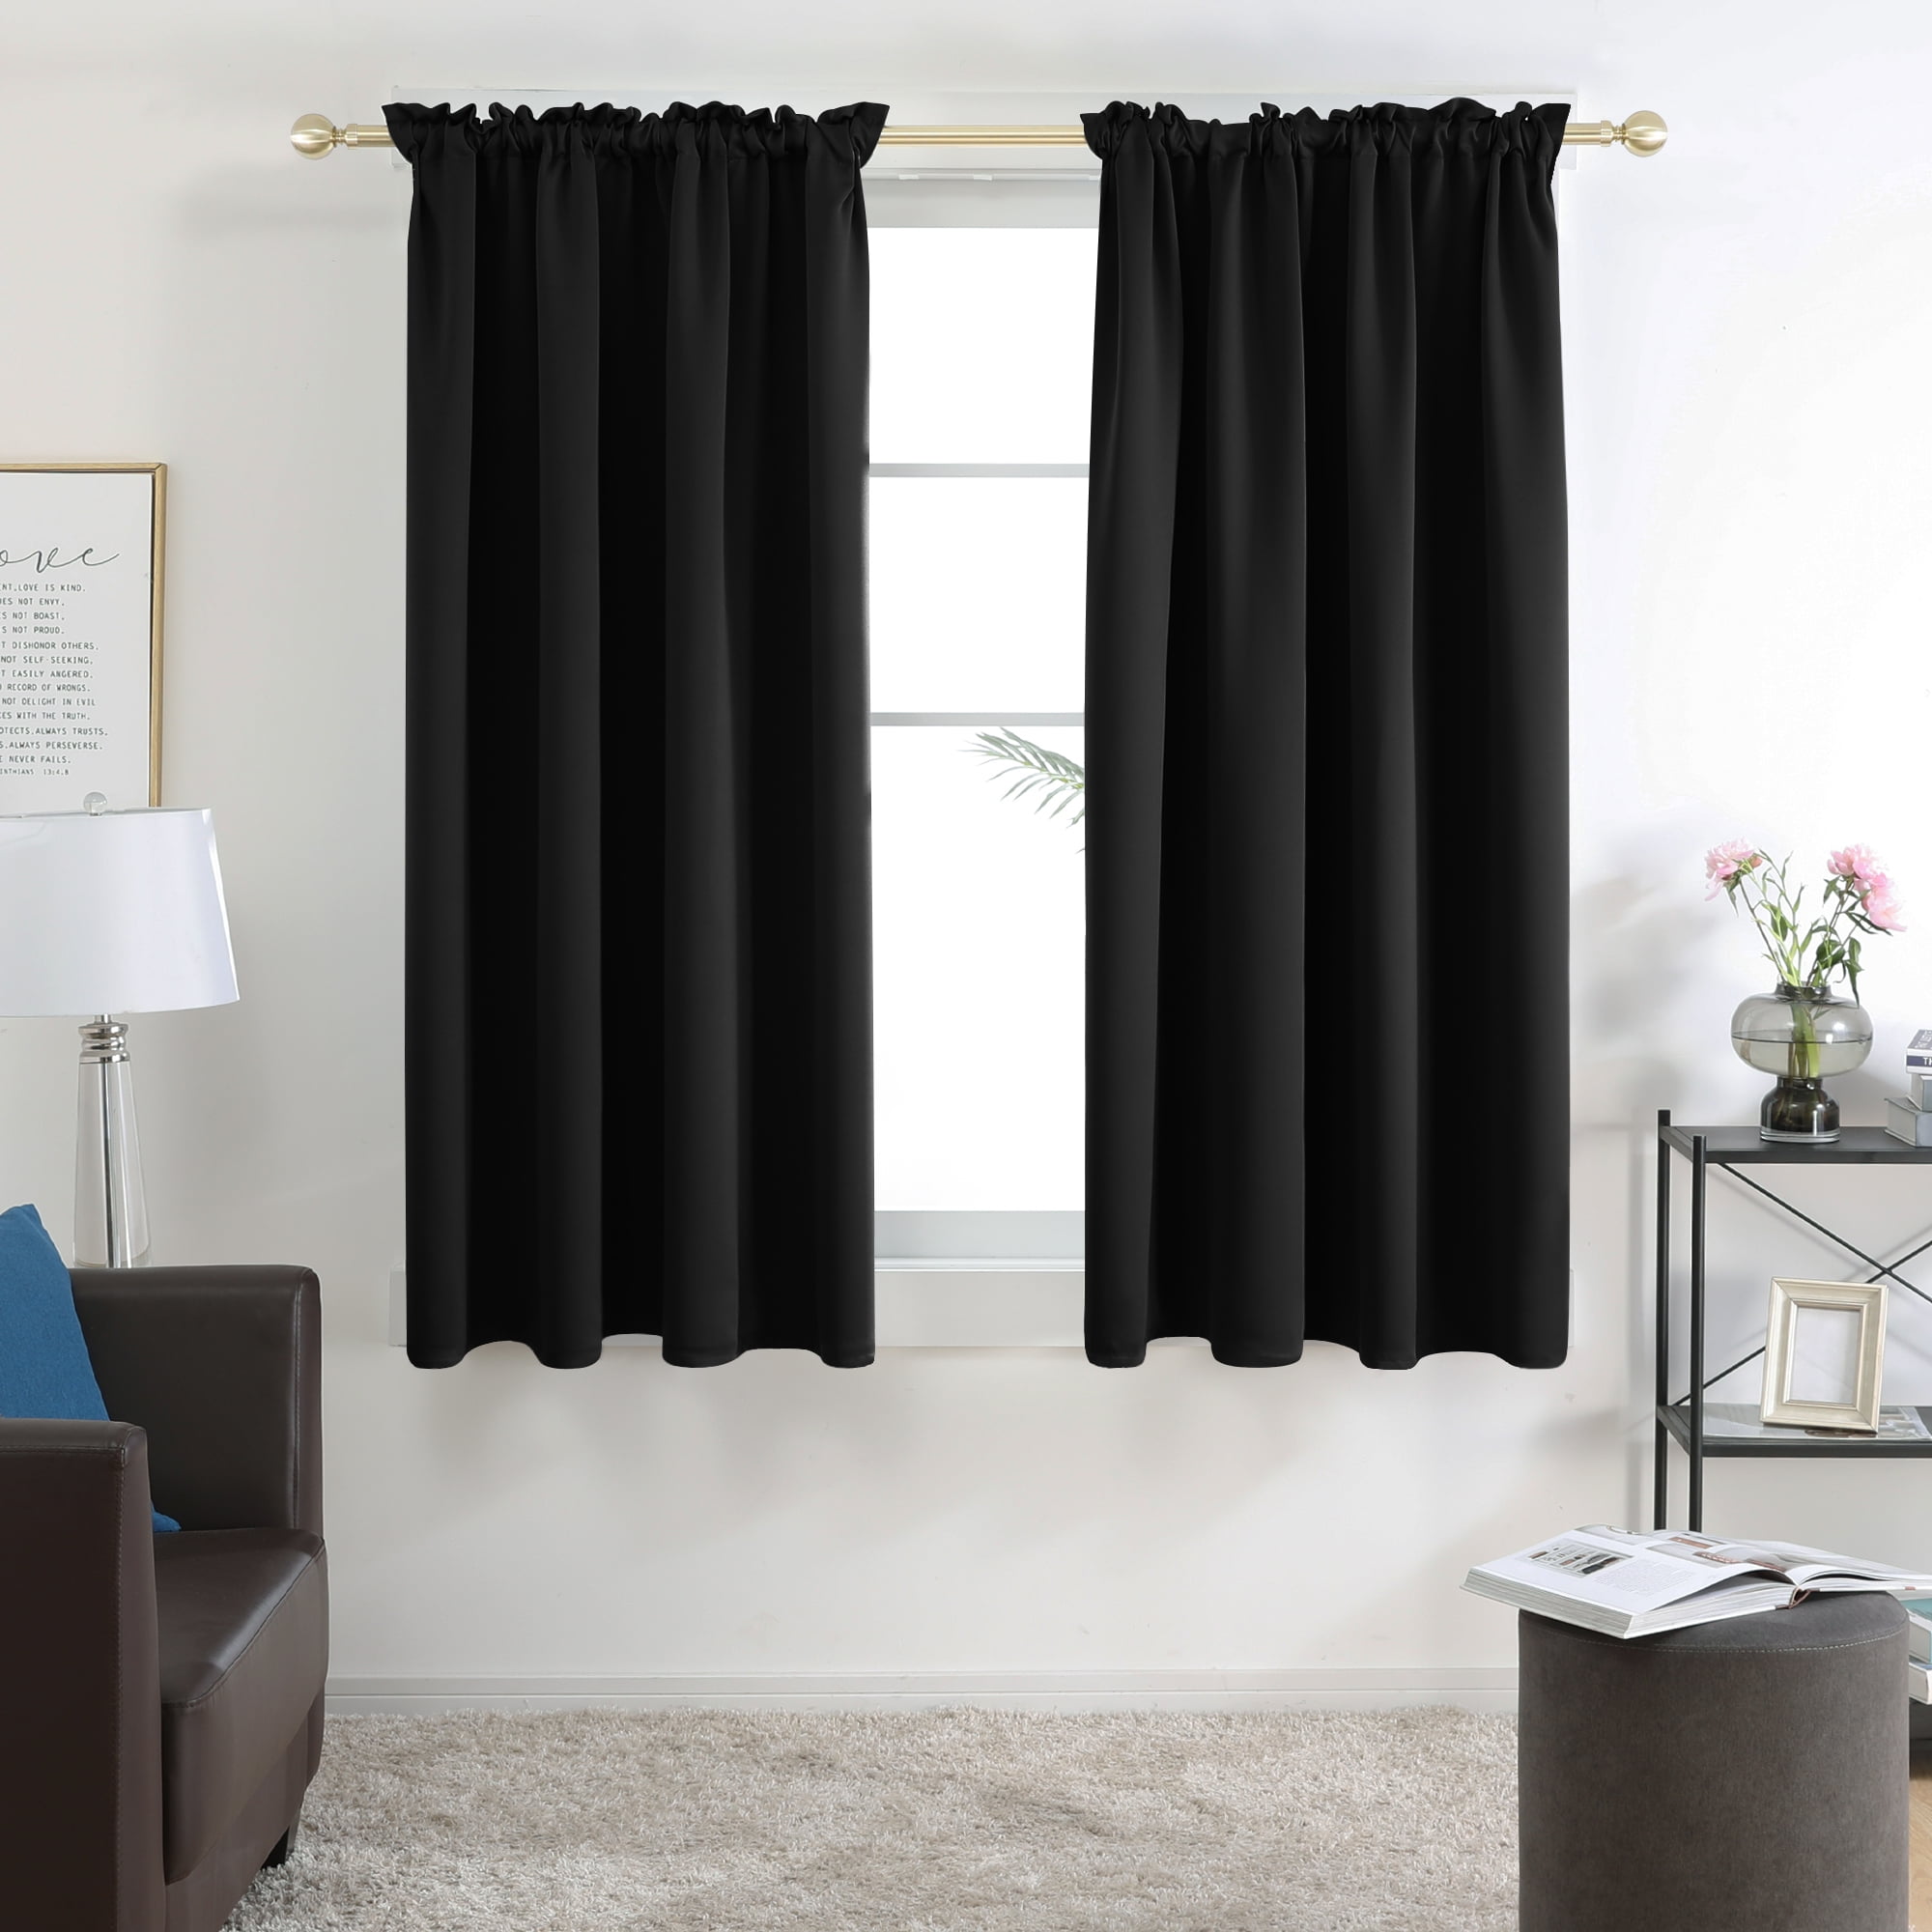 Details about   Bedroom Blackout Window Curtain 2 Panel Spiderman Living Room Curtains Drapes 